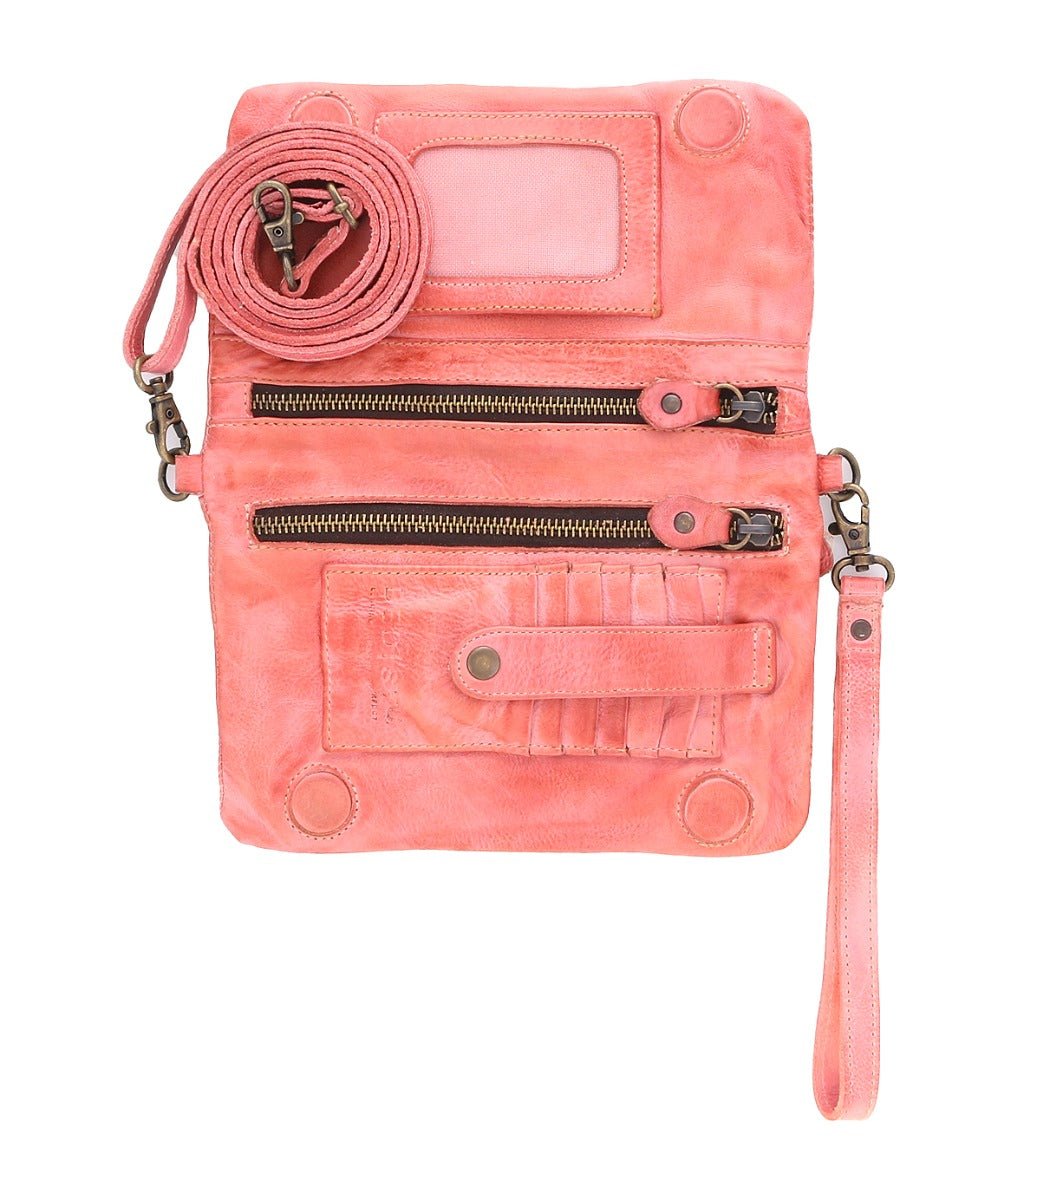 Inside a Cadence pink leather clutch bag by Bed Stu.